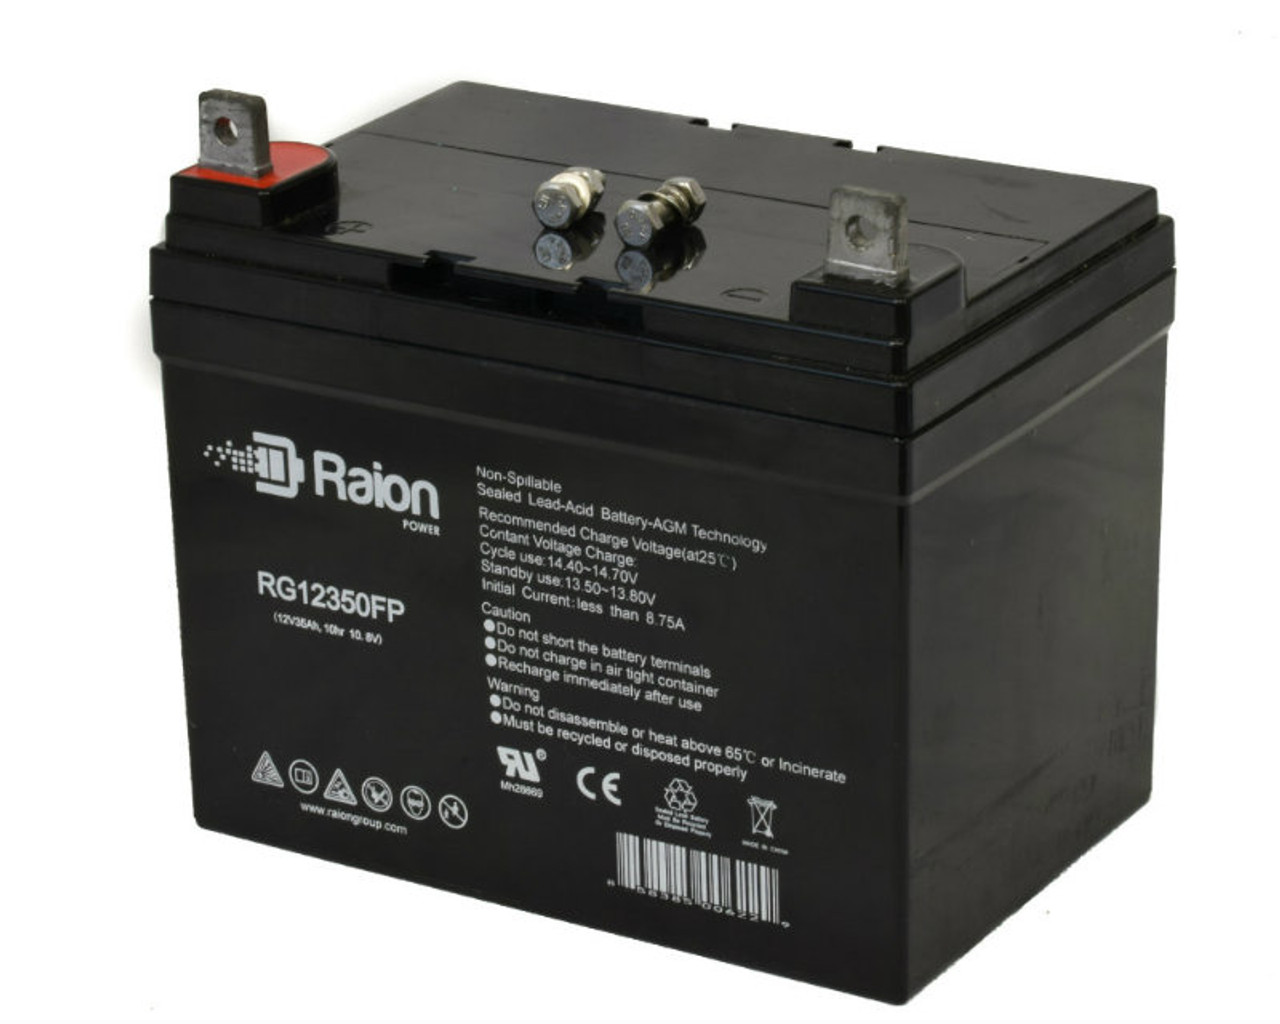 Raion Power Replacement 12V 35Ah RG12350FP Battery for Vectral 13HP 40"